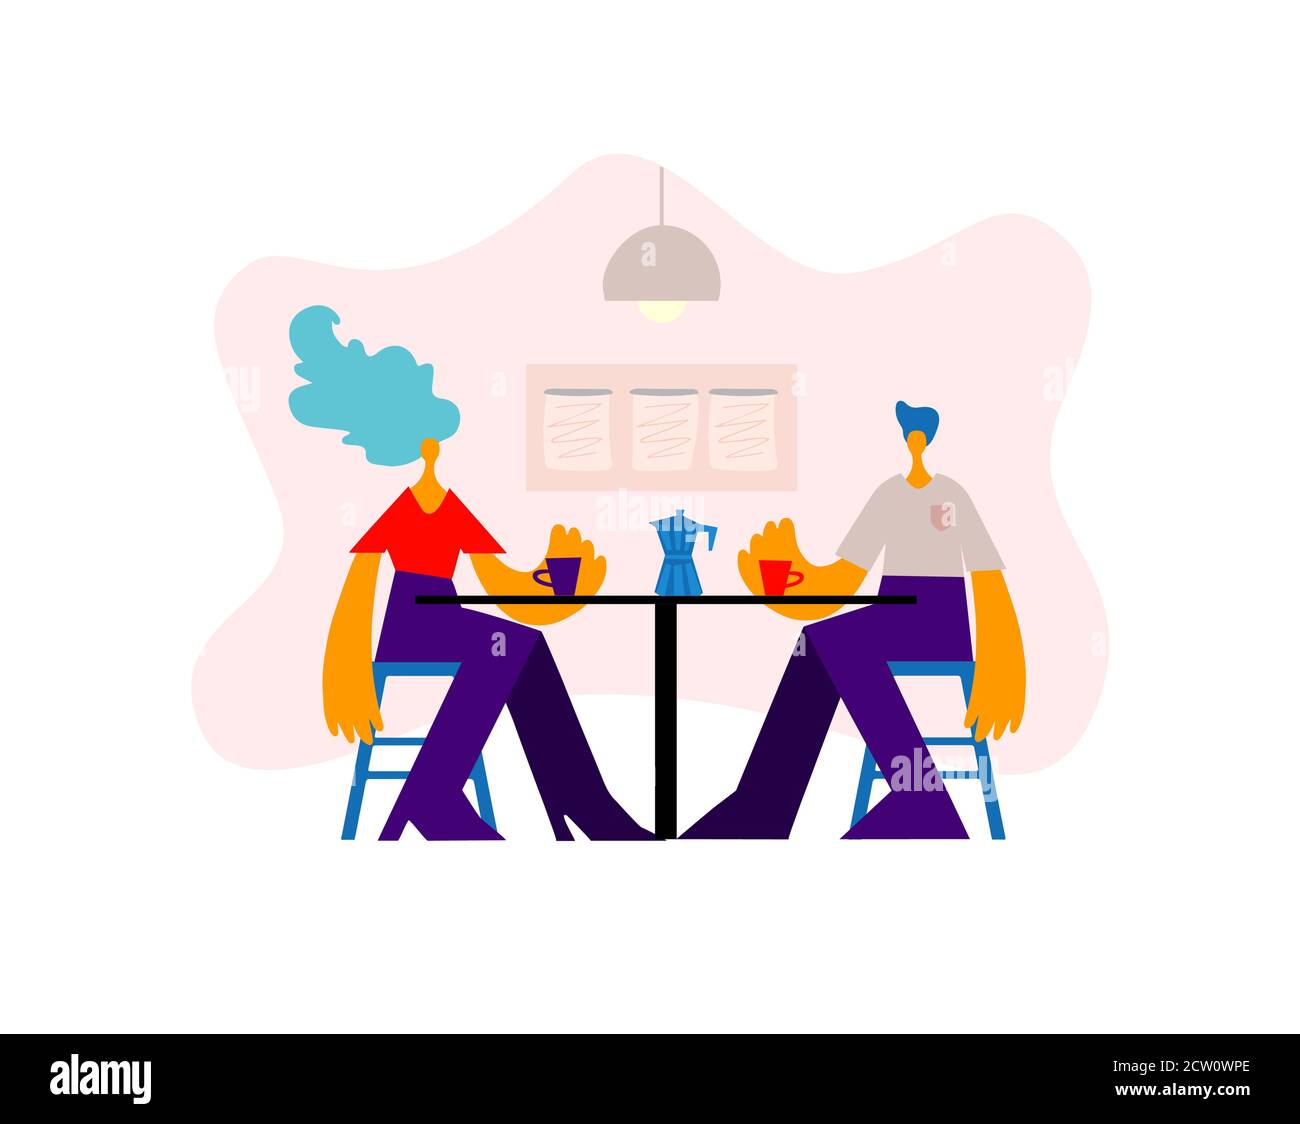 Happy man and woman sitting at the table chatting with mocha coffee in restaurant. Friends, colleagues, business meeting concept illustration vector. Stock Vector